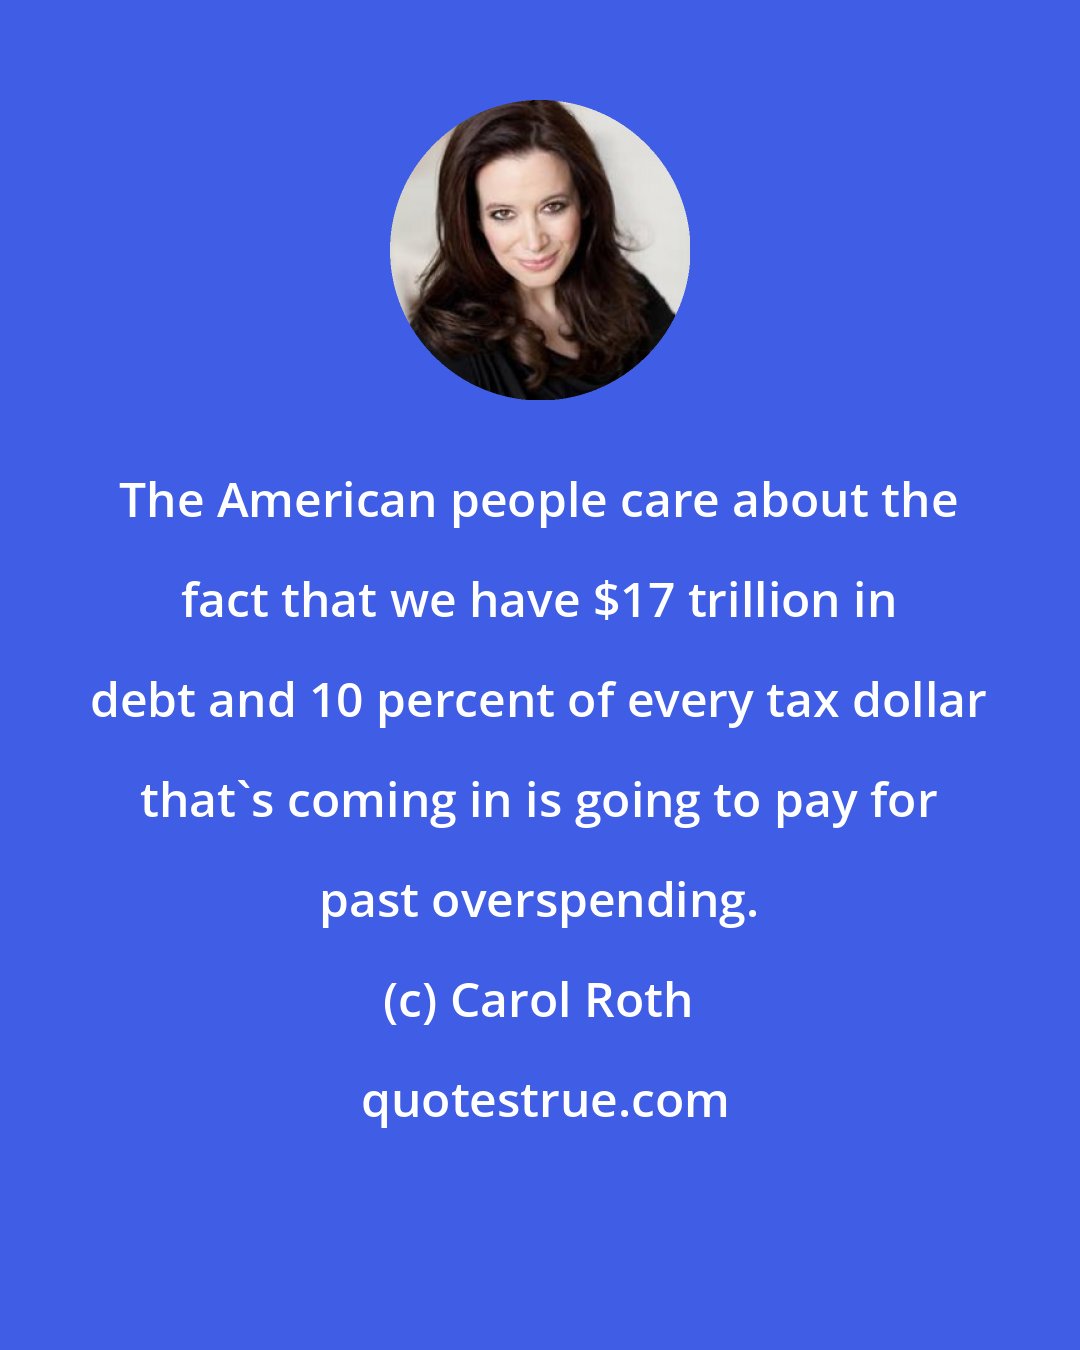 Carol Roth: The American people care about the fact that we have $17 trillion in debt and 10 percent of every tax dollar that's coming in is going to pay for past overspending.